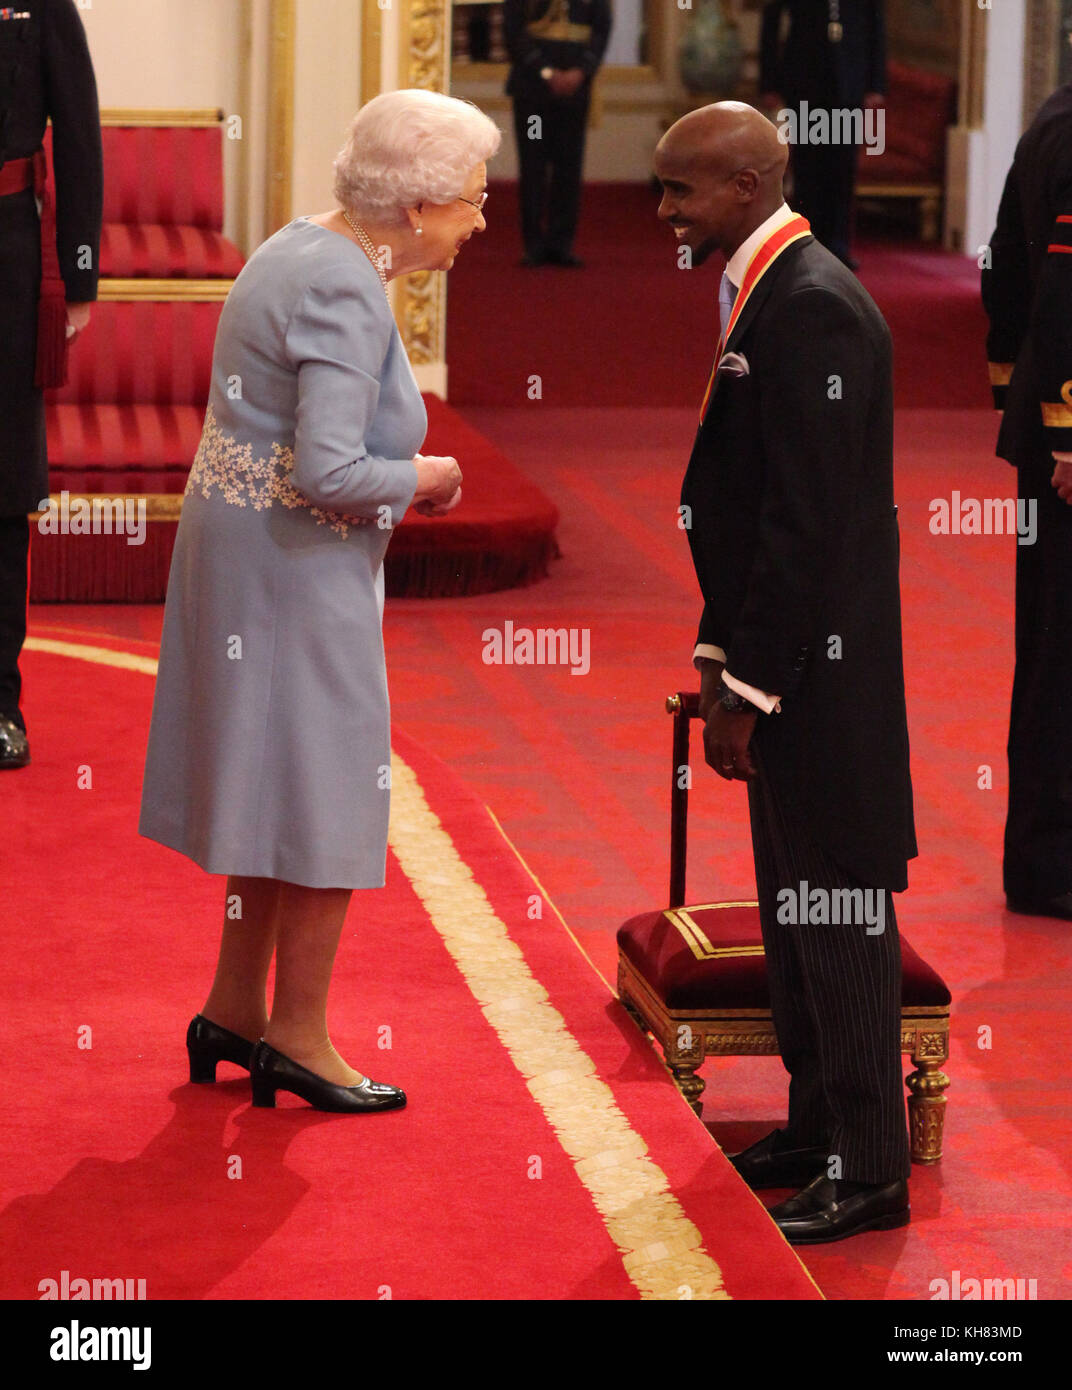 Sir Mohammed Farah from London is made a Knight Bachelor of the British Empire by Queen Elizabeth II at Buckingham Palace, London. Stock Photo